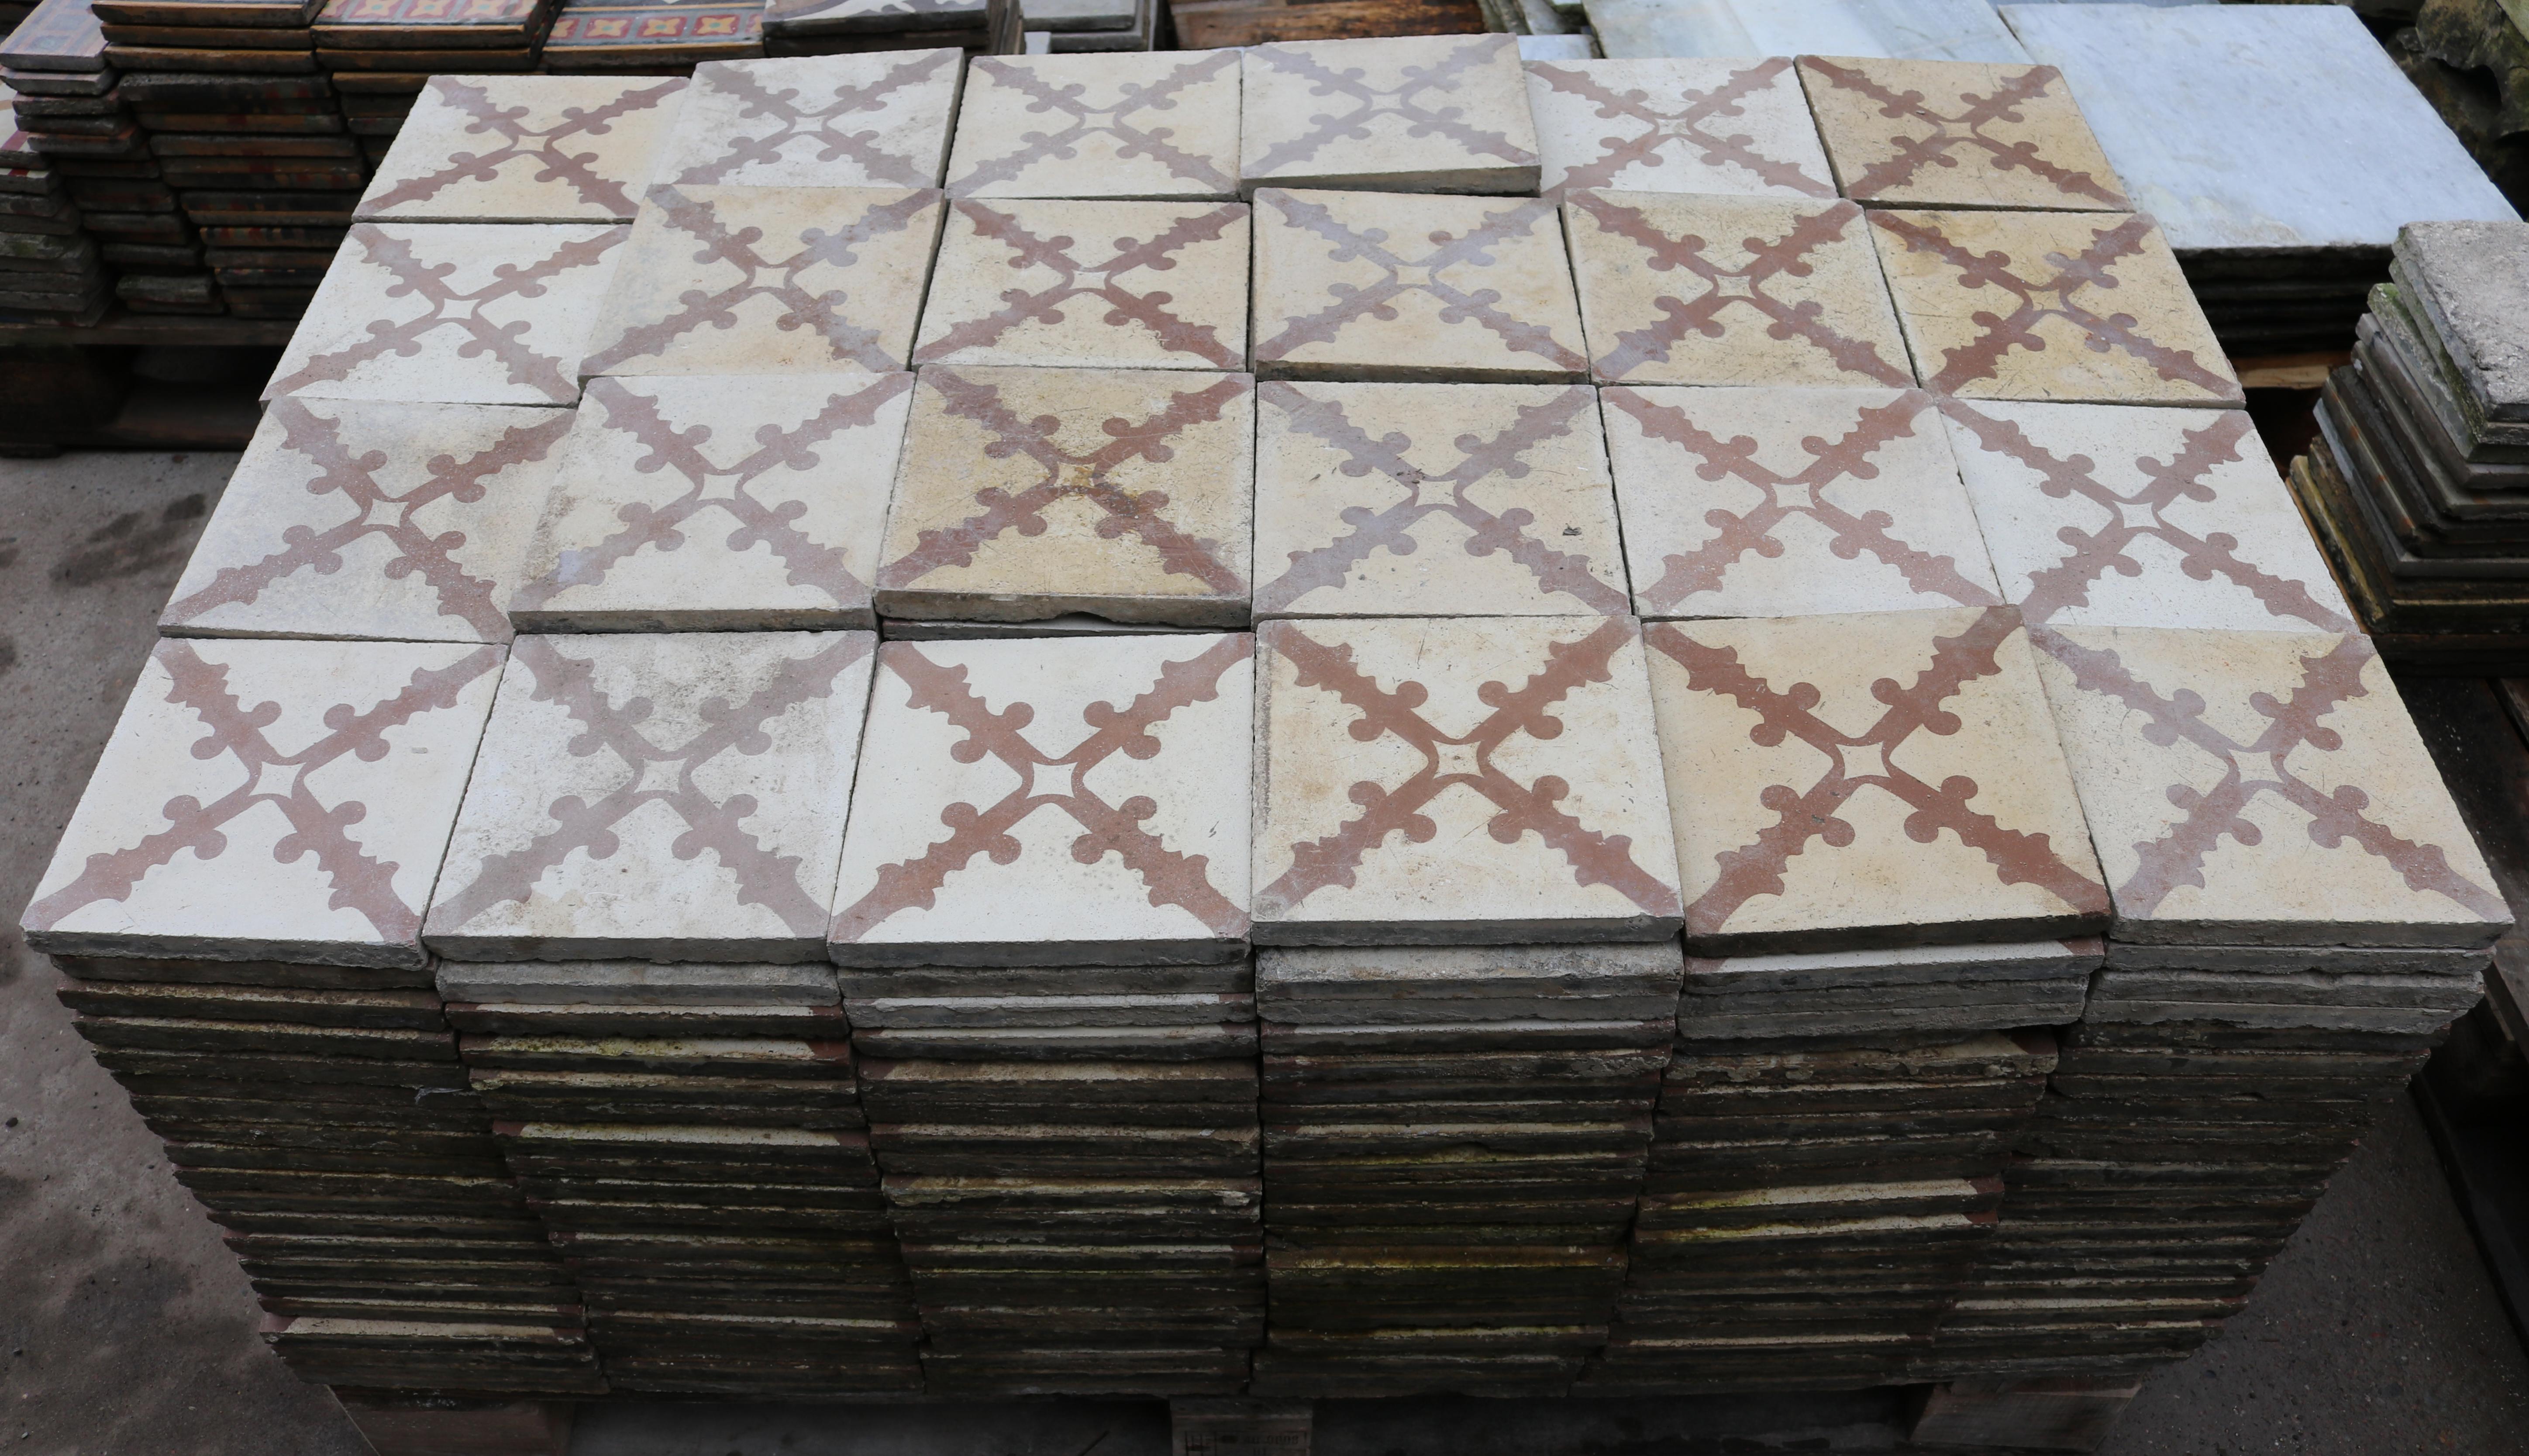 A batch of 480 reclaimed encaustic cement floor tiles. These tiles will cover 19.2 m2 or 206 sq ft.